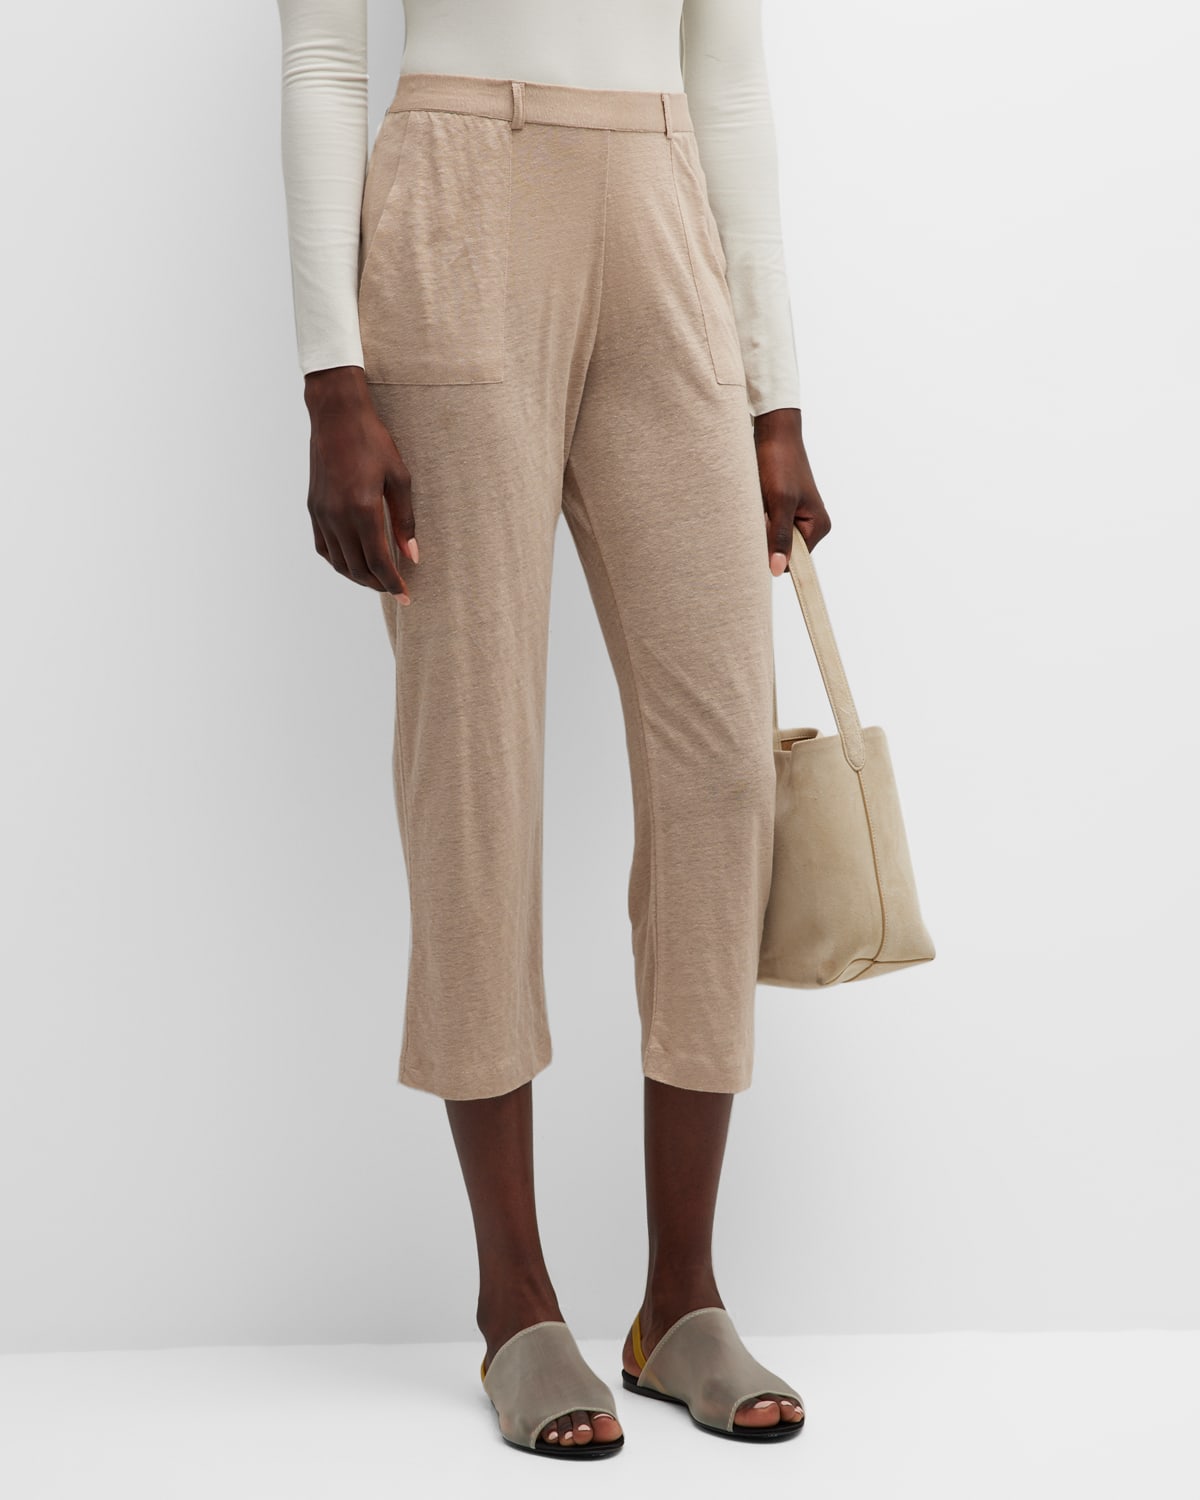 Stretch Linen Pull-On Pants